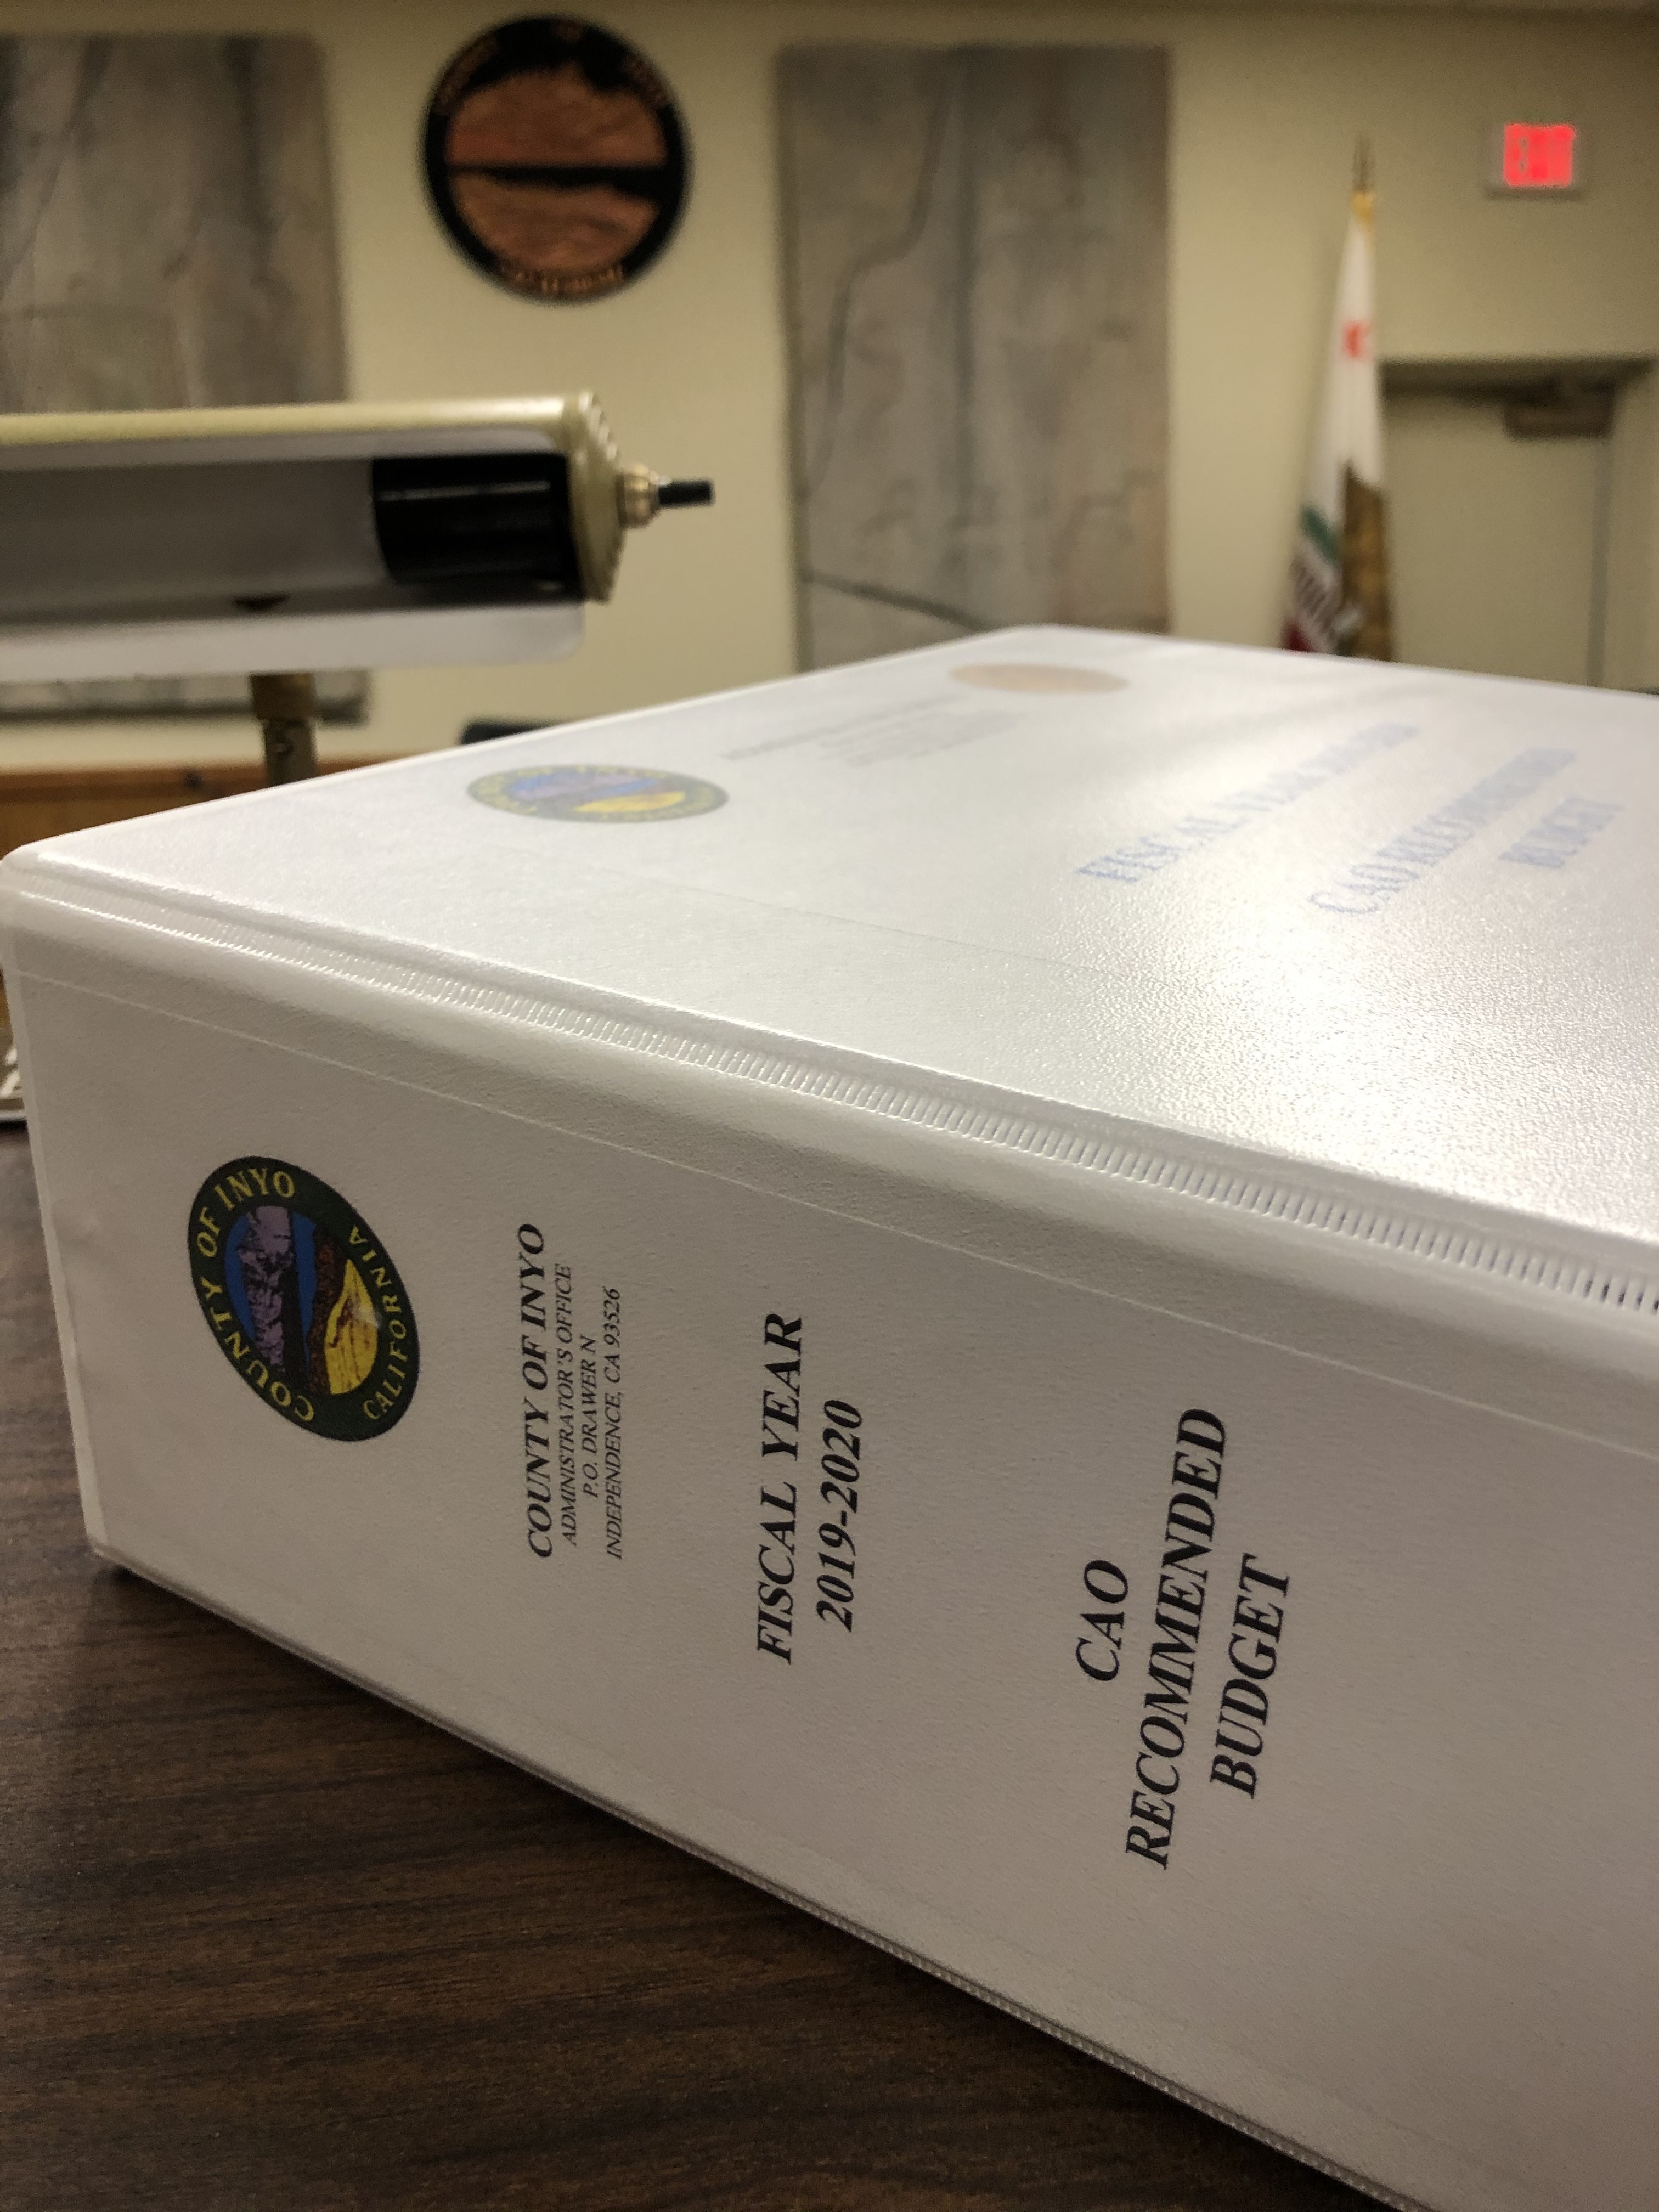 Three-inch thick white binder sitting atop podium in Board Room with County Seal on wall in background.